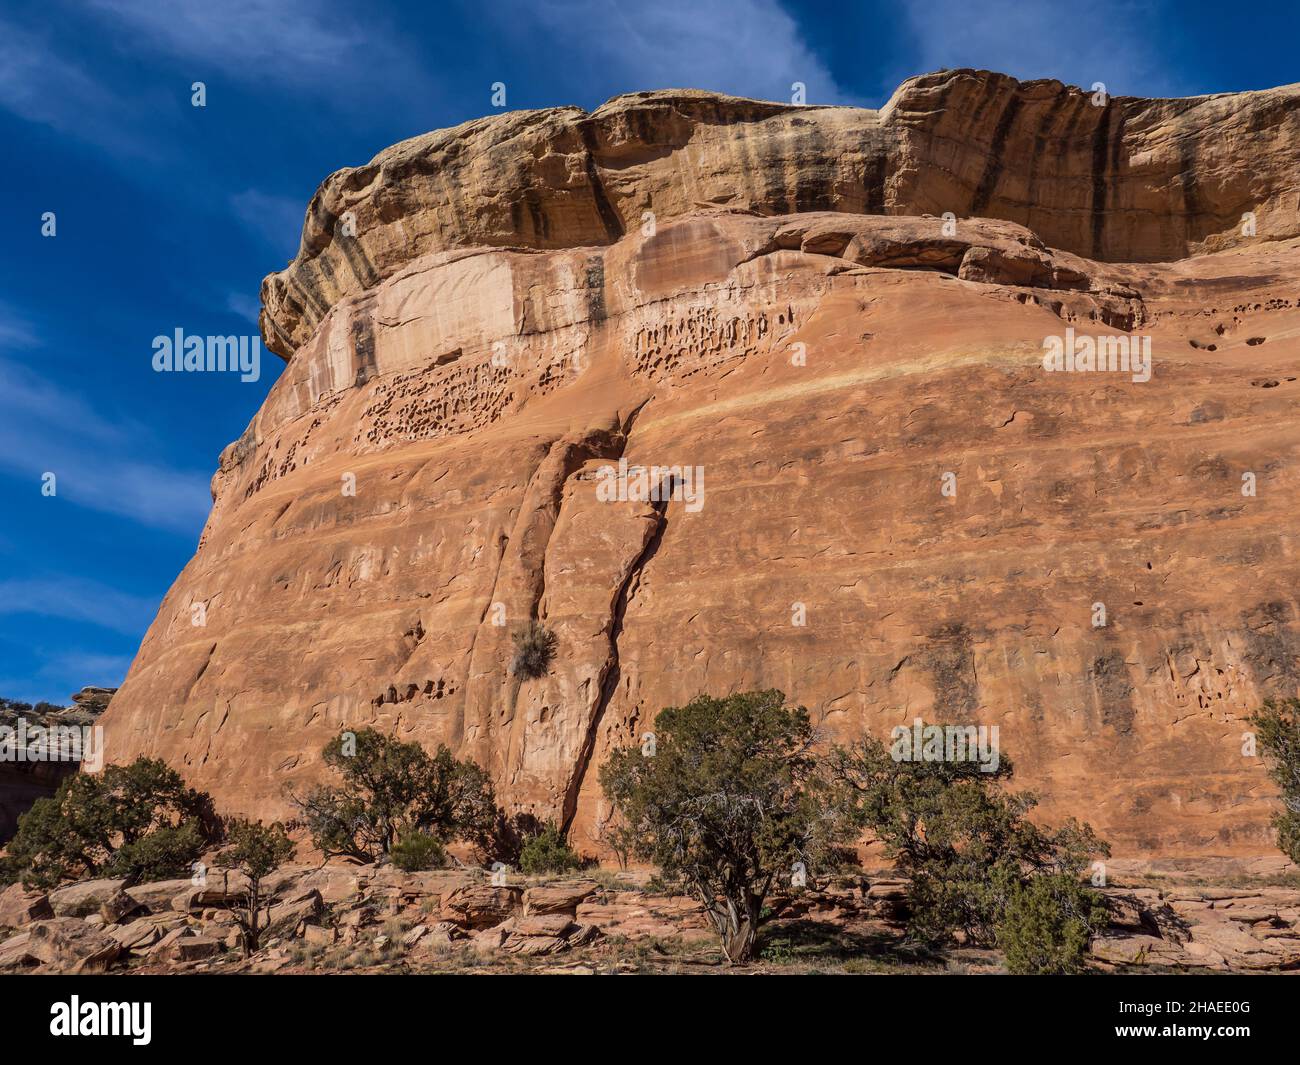 Canyon Walls, D4 Loop Trail, Fruita Front Country, McInnis Canyons National Conservation Area in der Nähe von Fruita, Colorado. Stockfoto